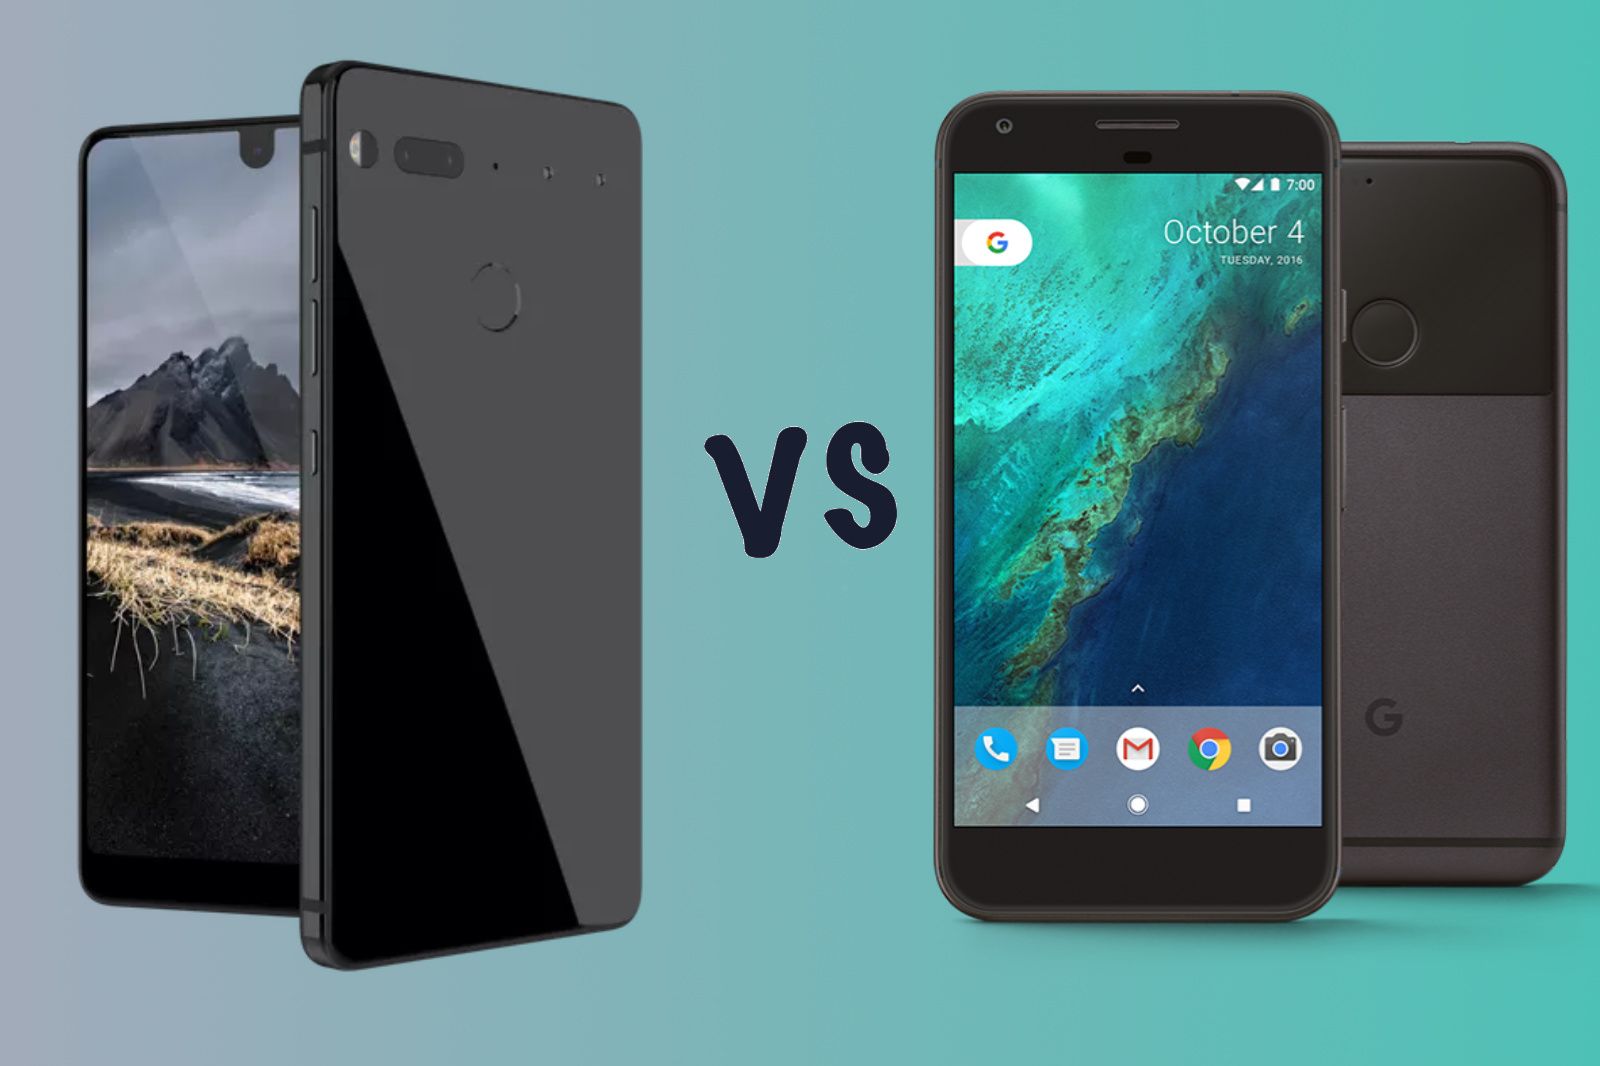 essential phone vs google pixel xl vs pixel what s the difference image 1